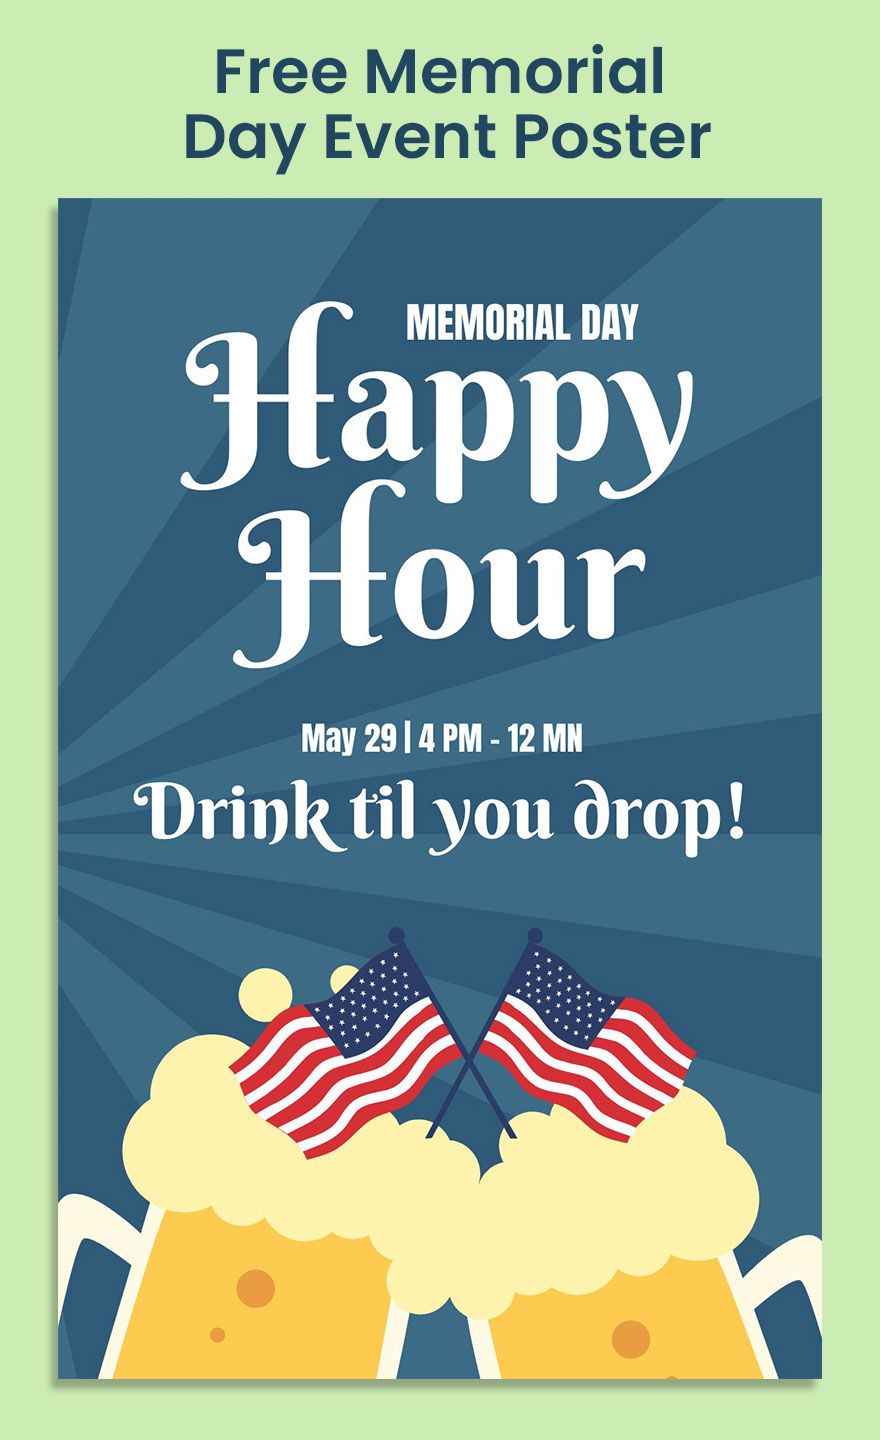 Free Memorial Day Event Poster in Word, Google Docs, Illustrator, PSD, EPS, SVG, PNG, JPEG